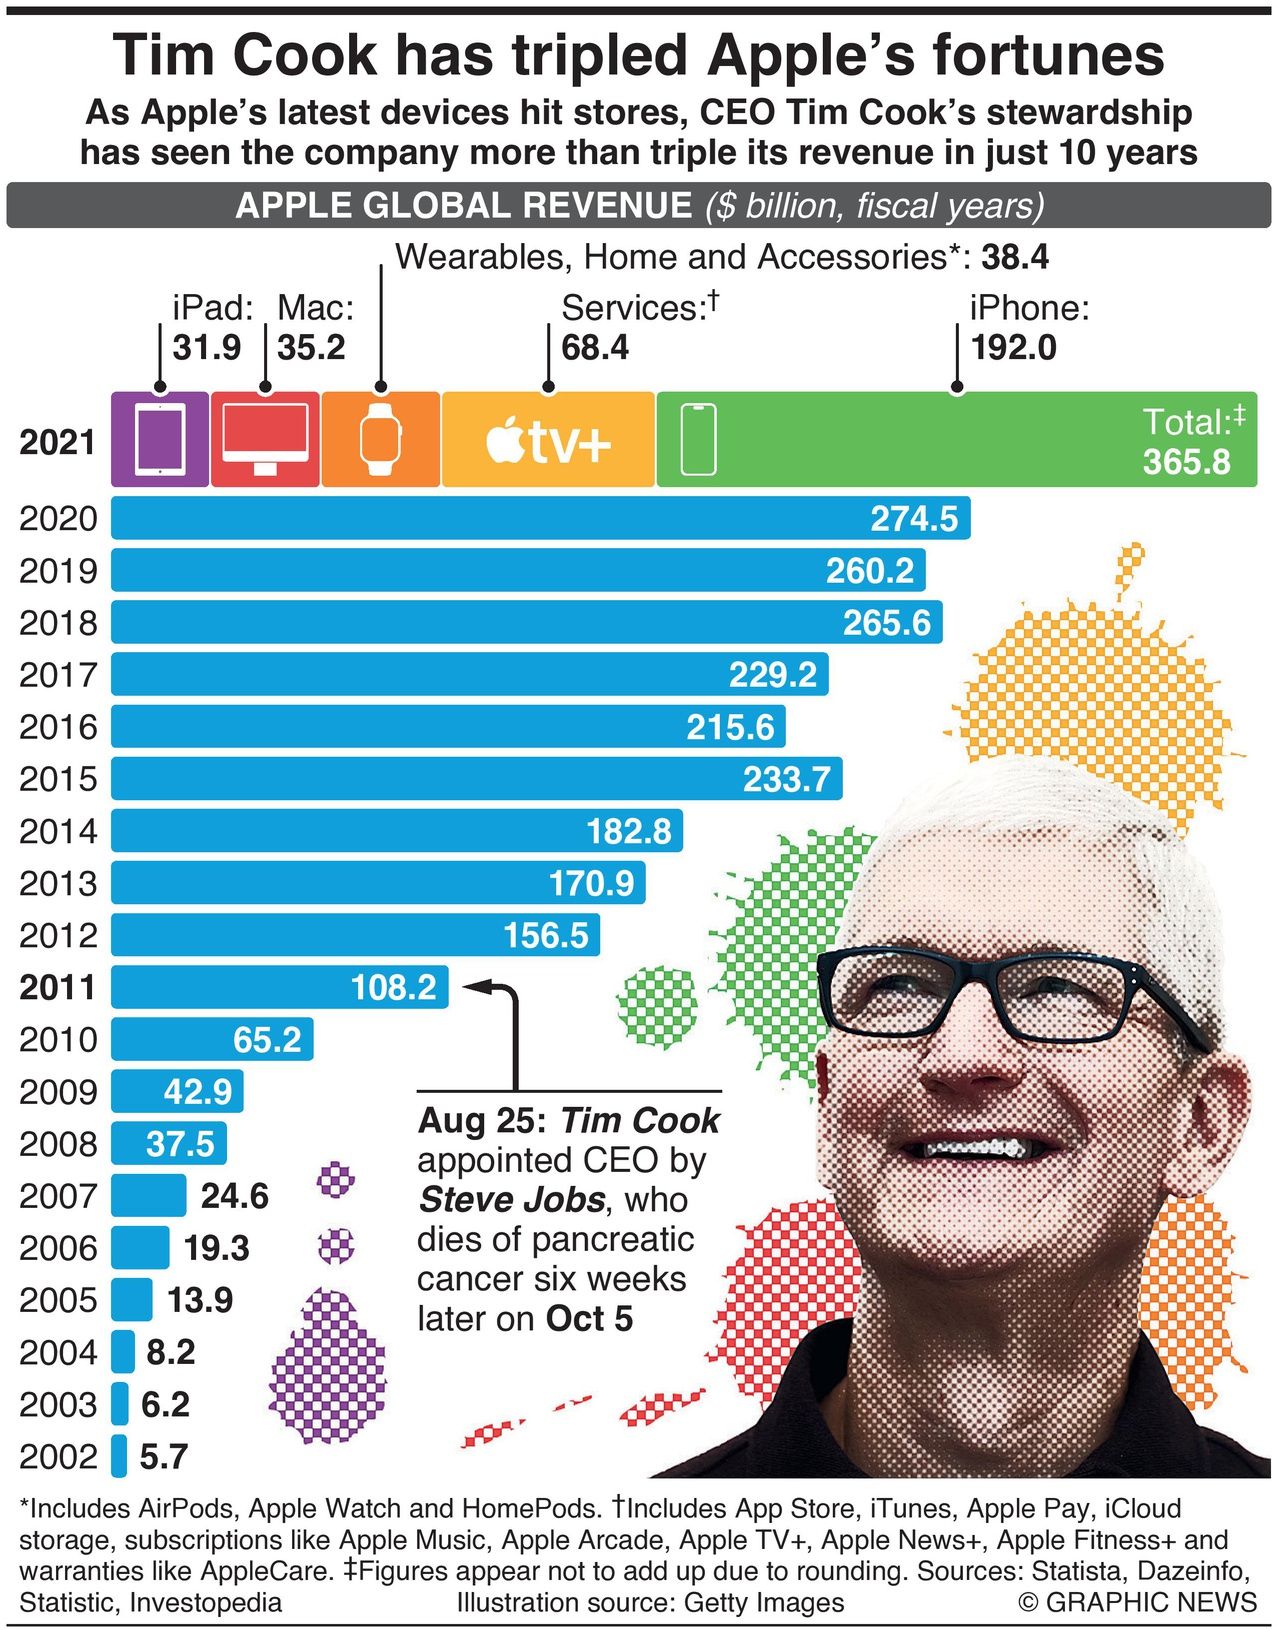 Graphic showing how Tim Cook has tripled Apple's fortunes since taking over 10 years ago